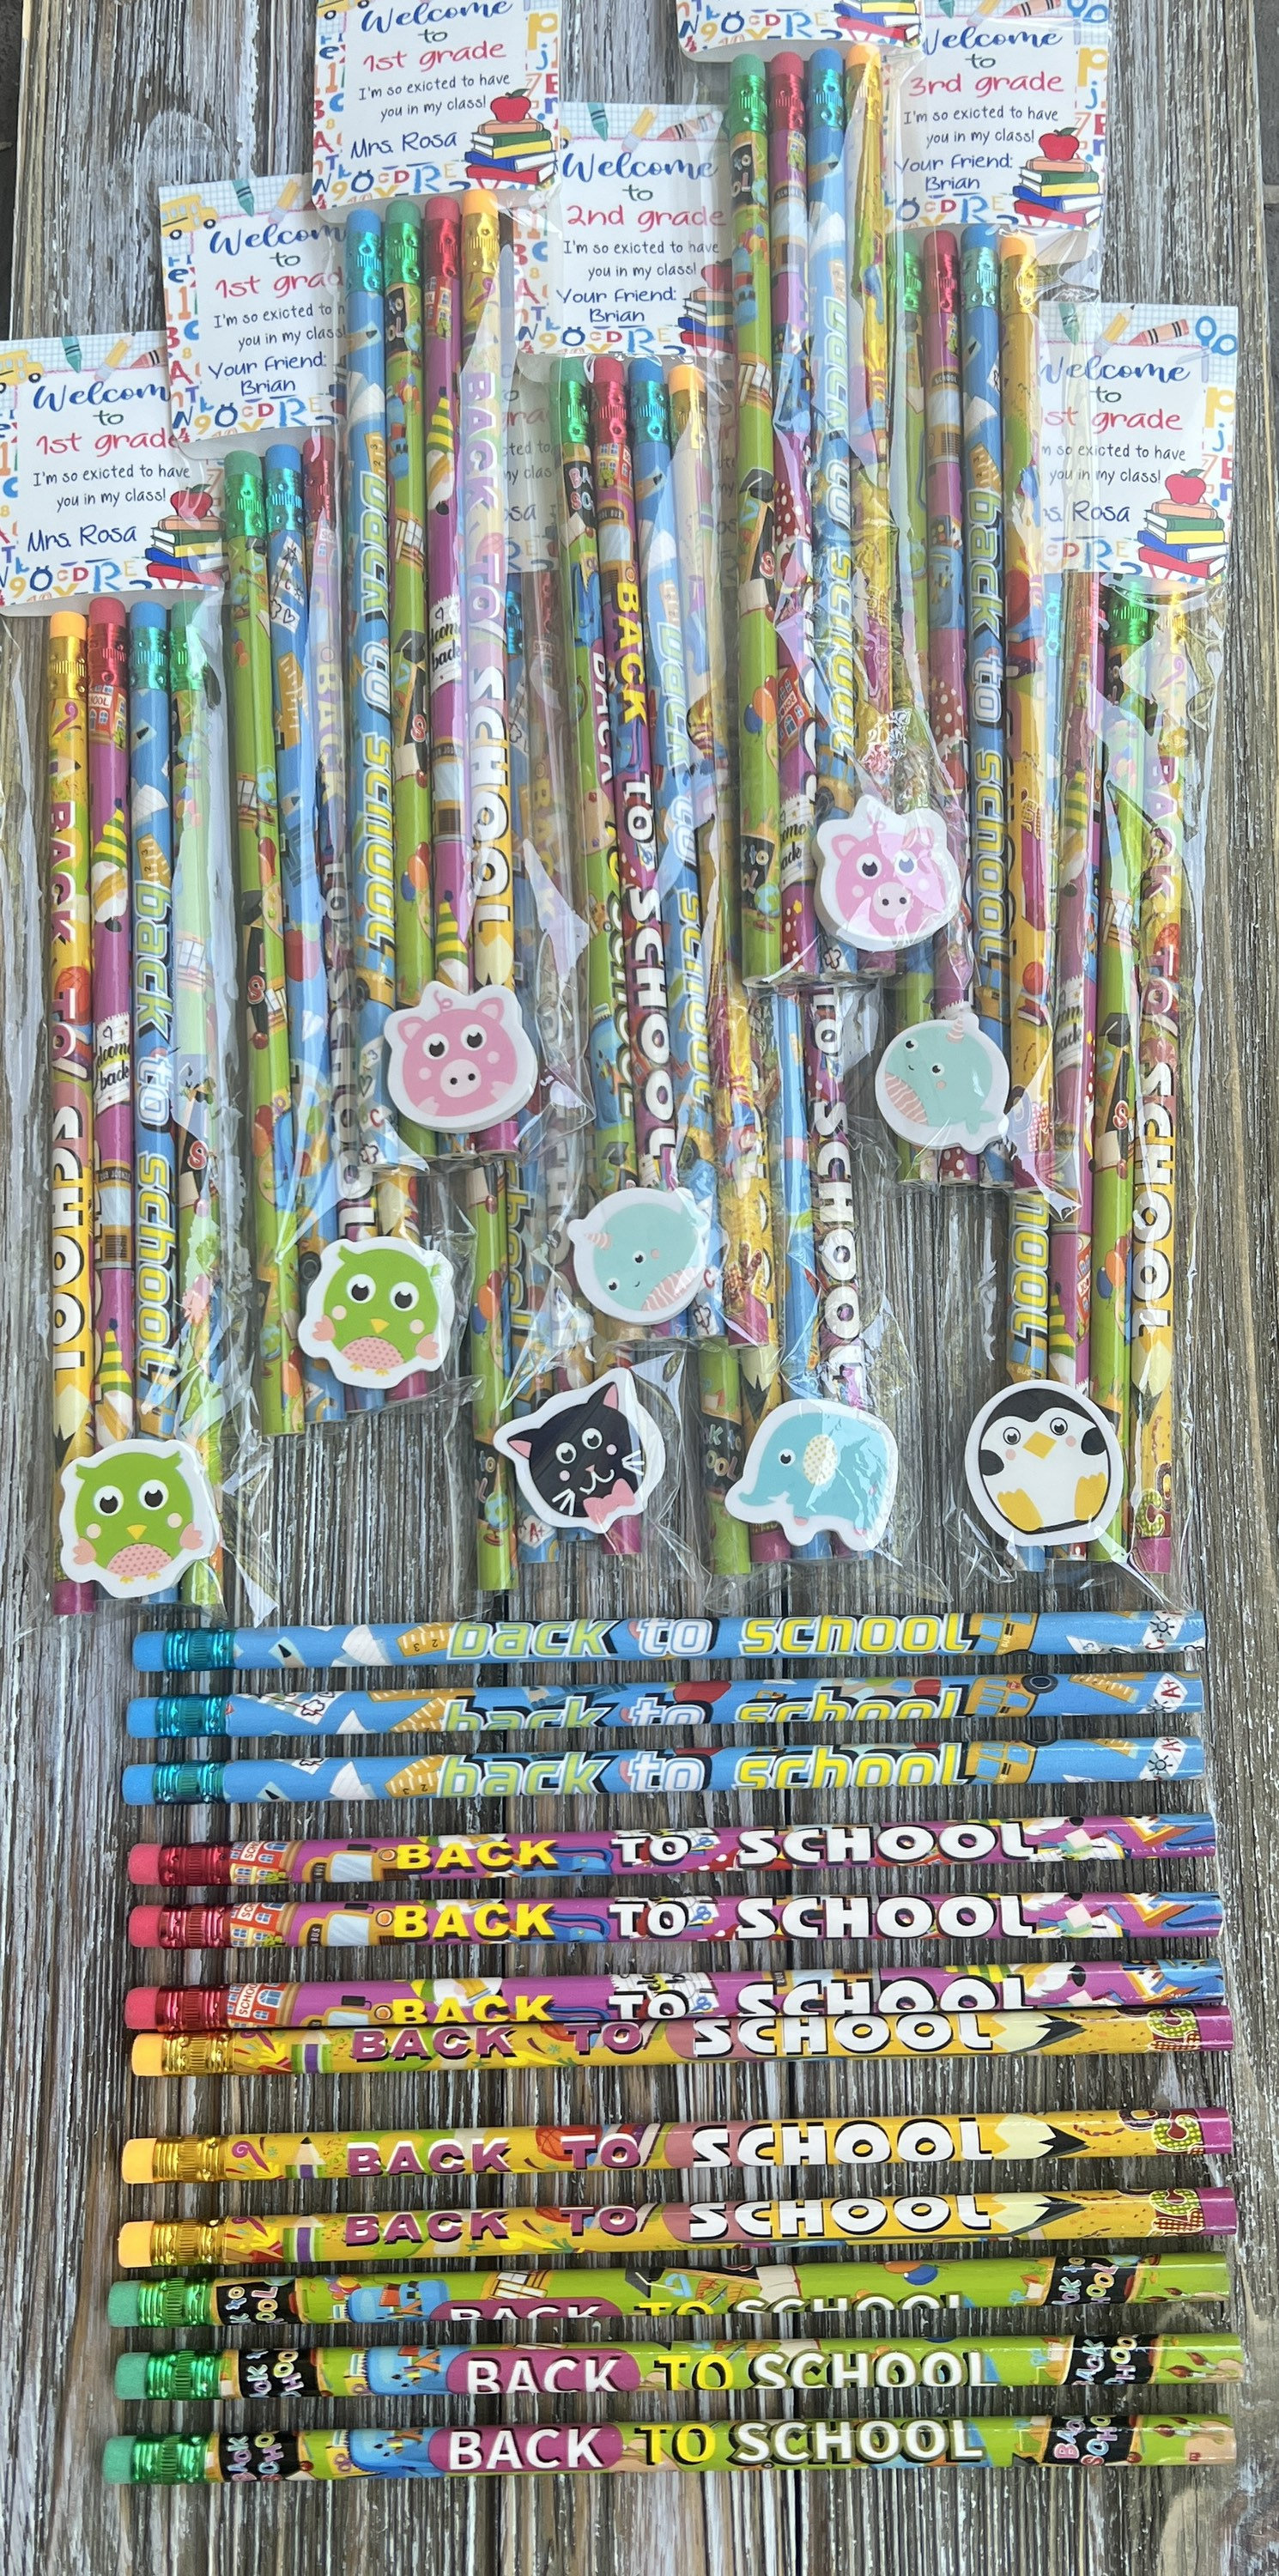 Kids Pencils, Gifts for Kids, Kids Party Favor, Kids Birthday Gift, Puppet  Show Pencil, Indian Dolls, Kids Return Gifts Classroom 